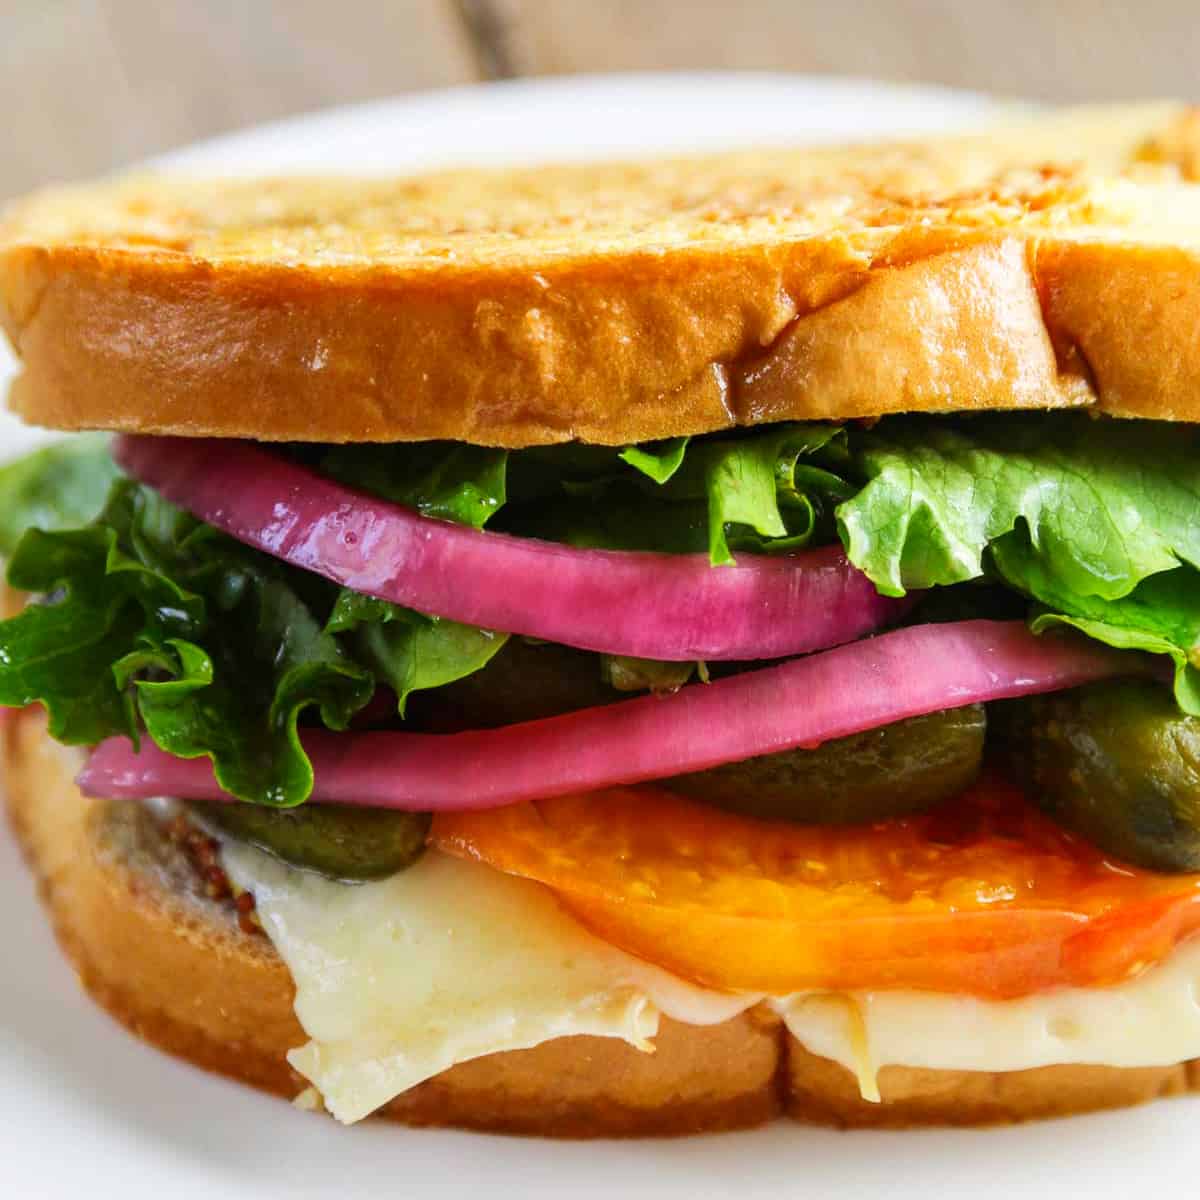 A stacked gourmet grilled cheese sandwich with cheese, tomato, red onions, and lettuce.